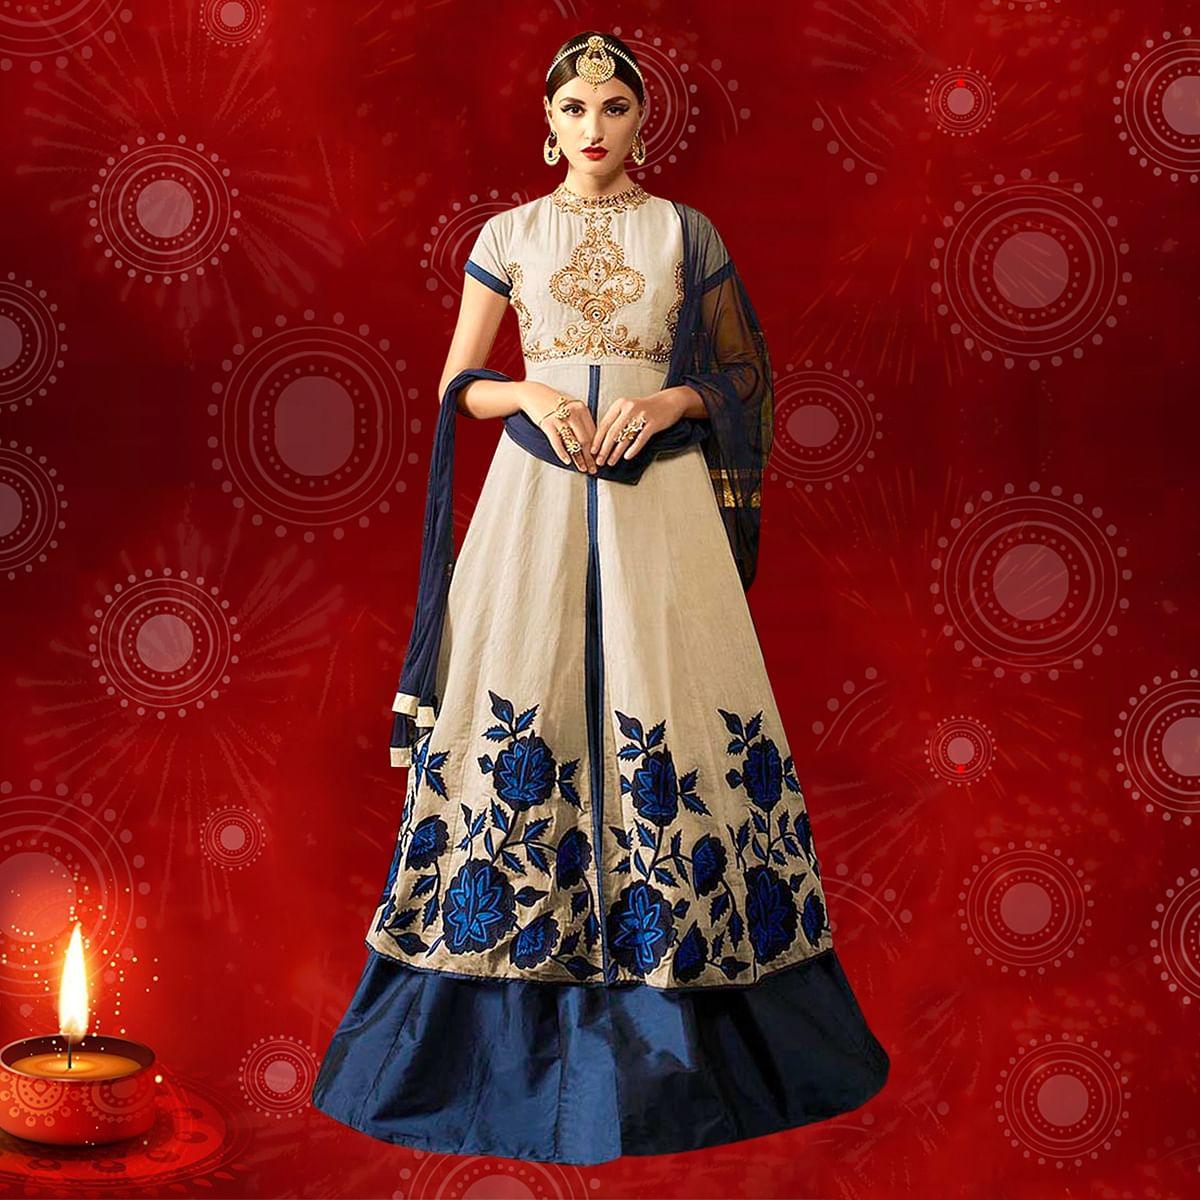 STUNNING OUTFITS FOR THE 5 DAYS OF DIWALI